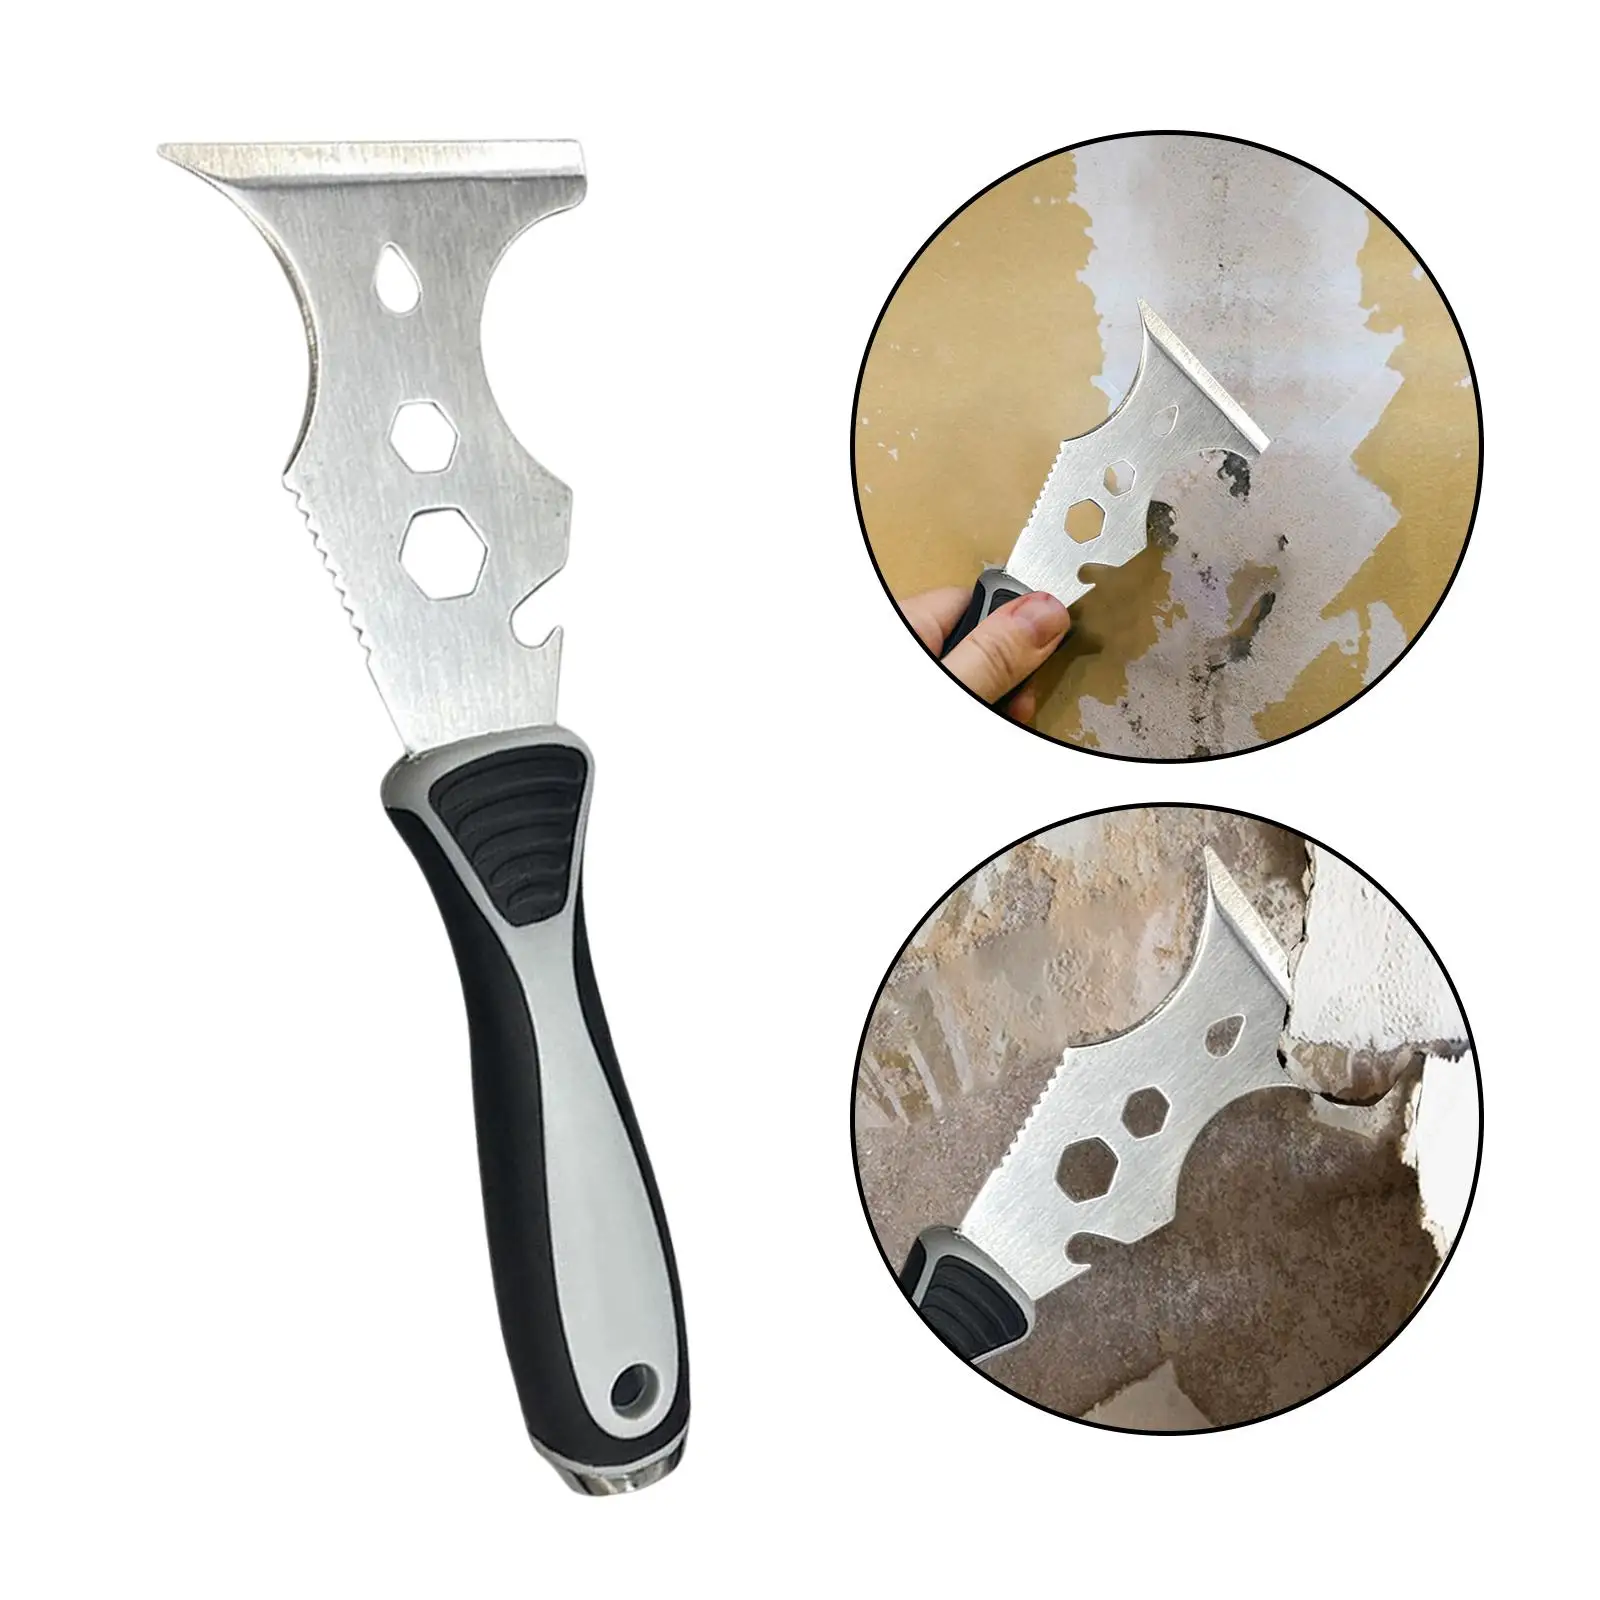 Multifunctional Scraper Tool Painting Tools Paint Remover Glue Removing Tool Professional Putty Knife daily cleaning Repair